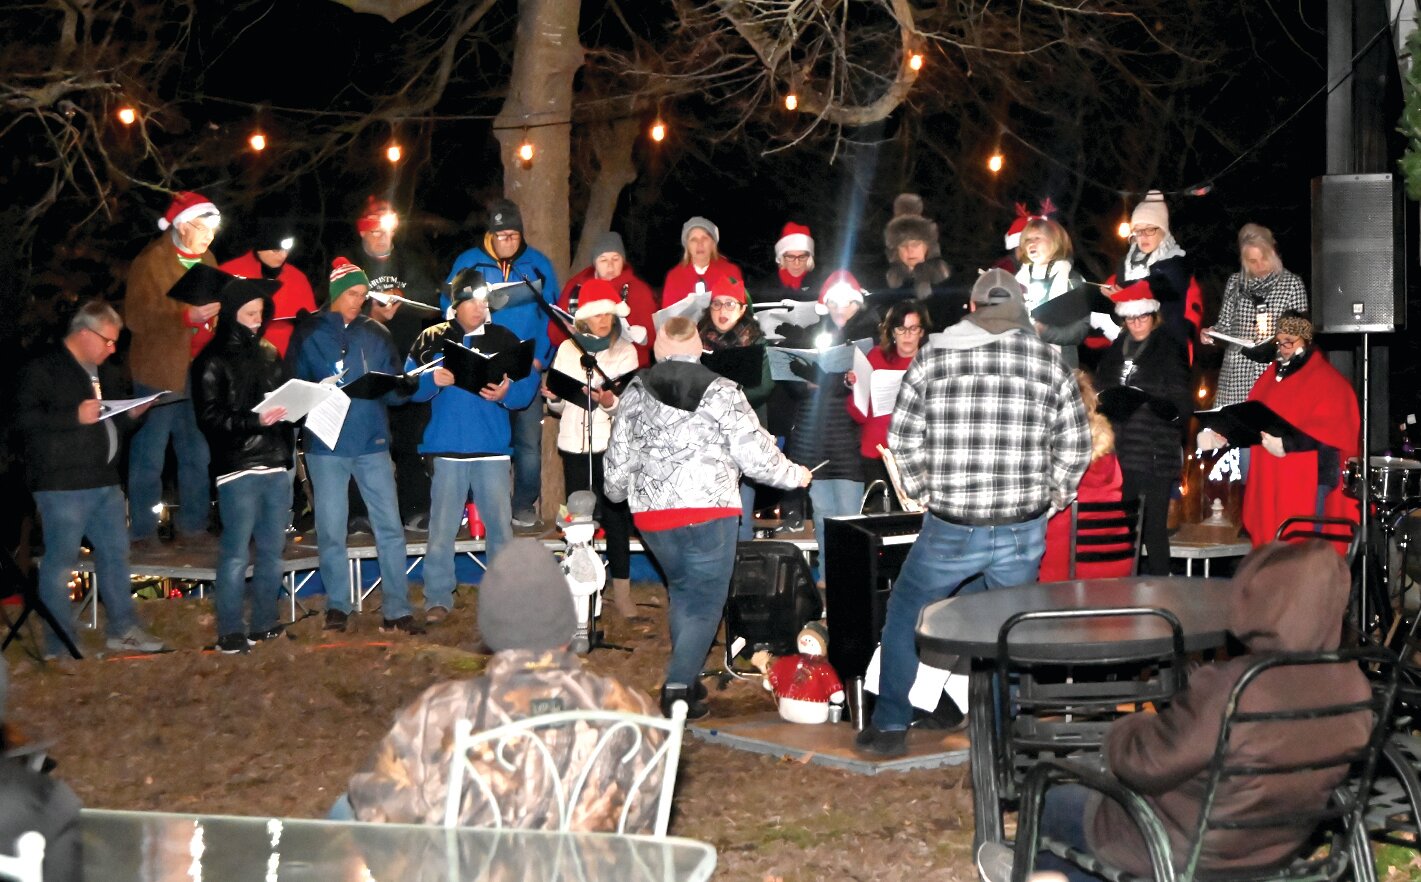 Carolers offering Yuletide greetings before the Christmas tree-lighting ceremony.